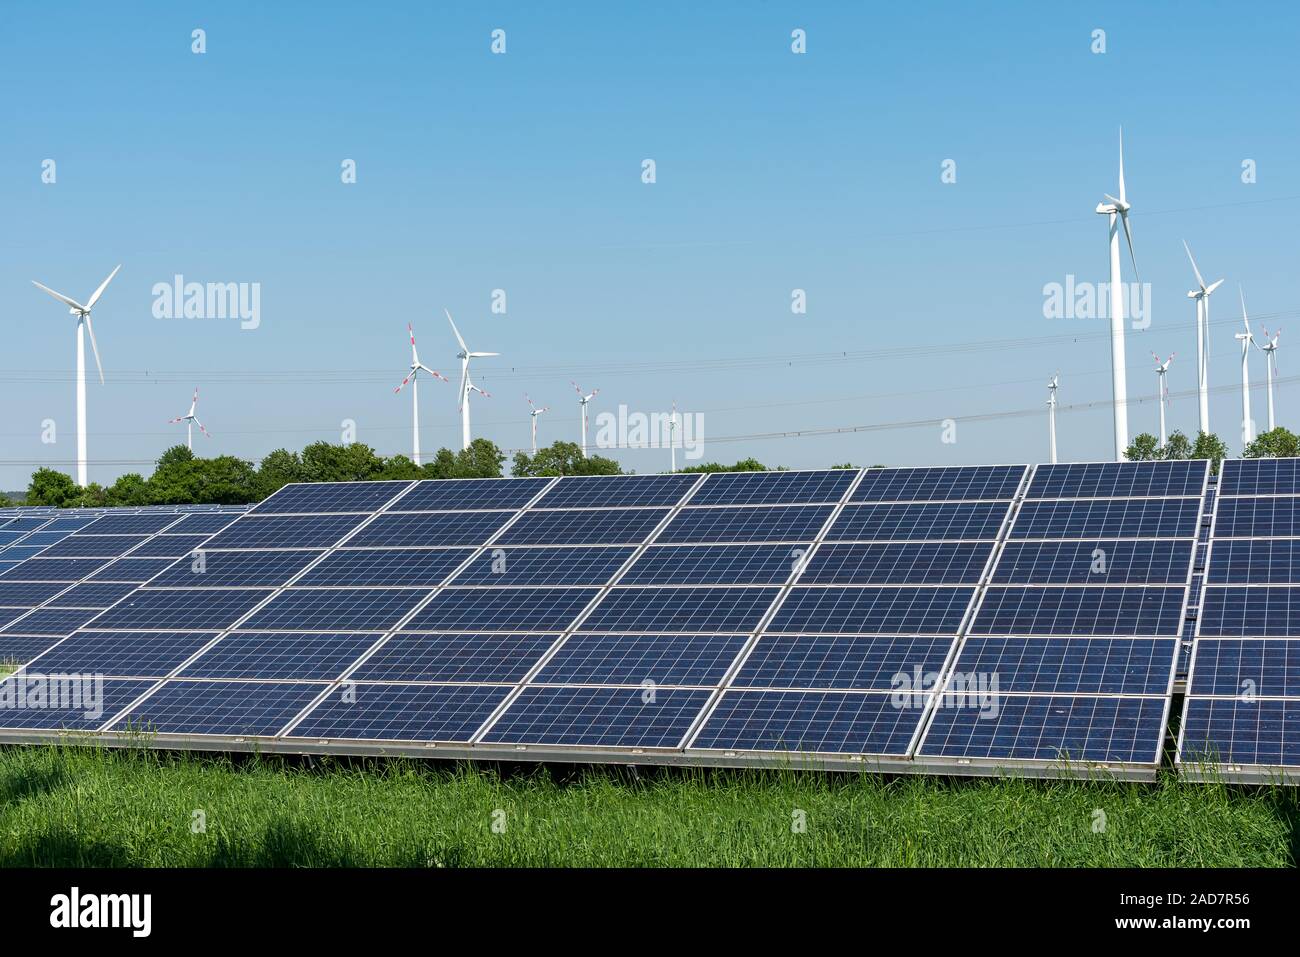 Solar panels and wind power plants seen in Germany Stock Photo